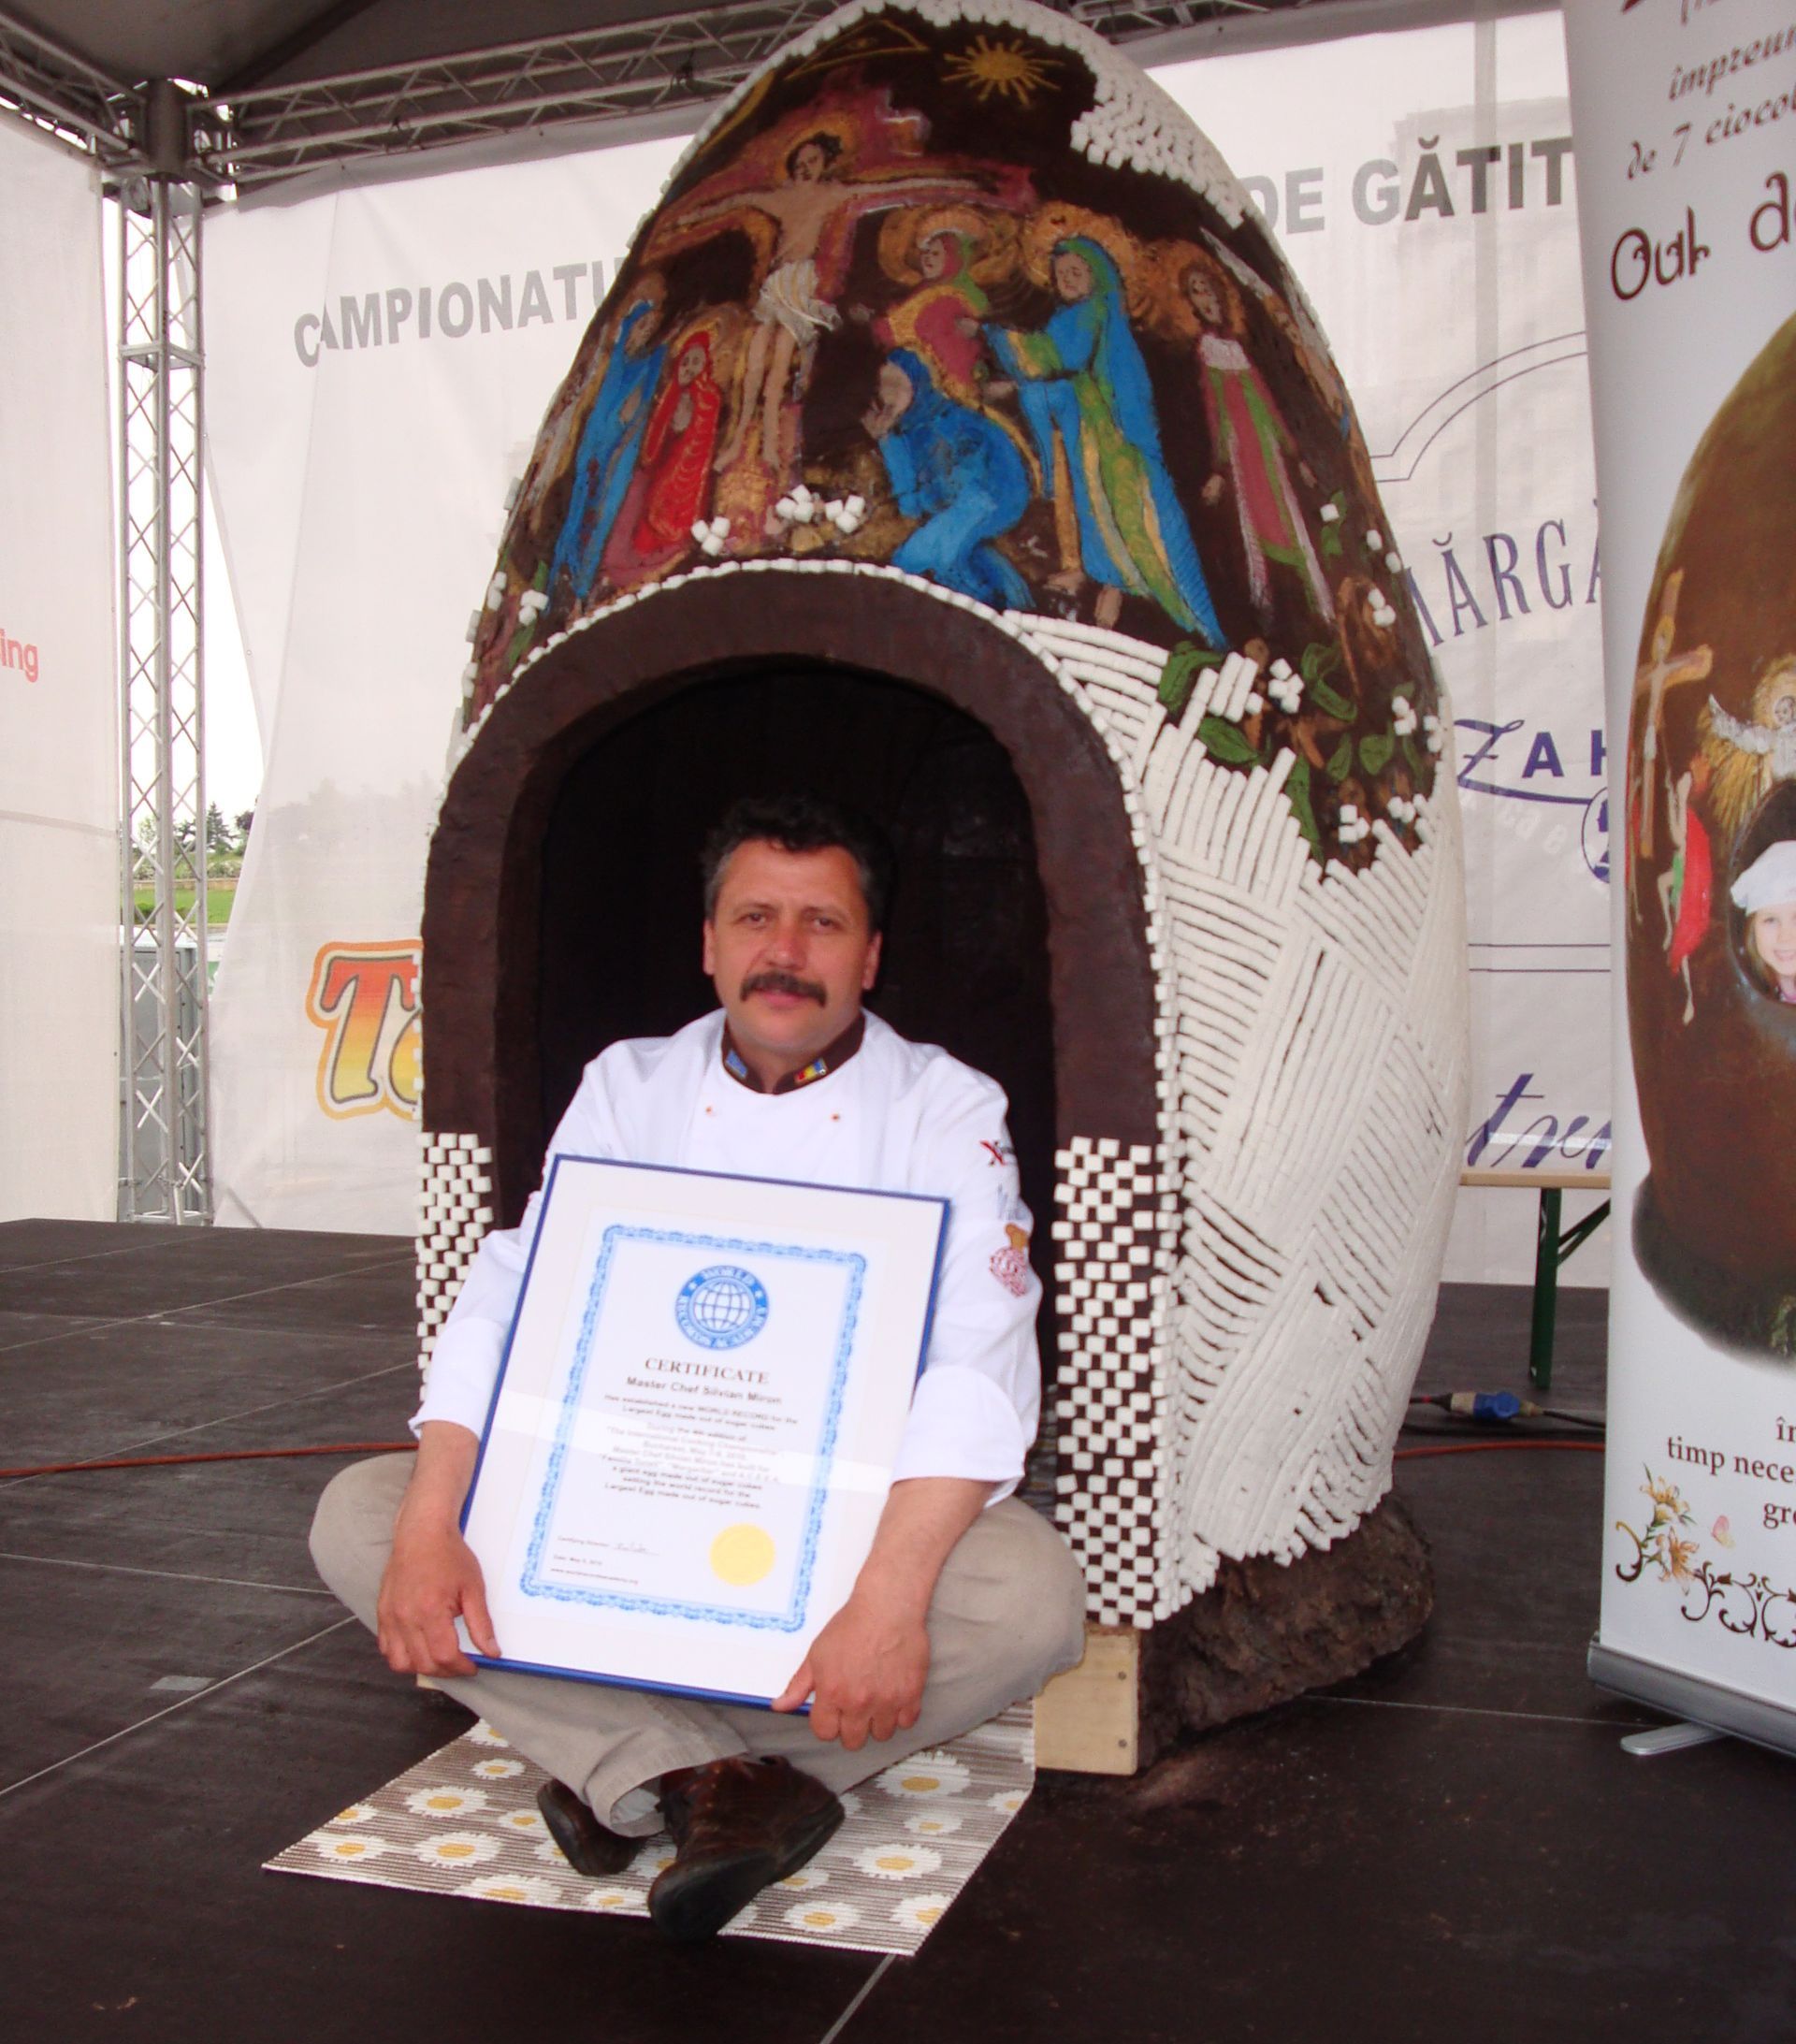 World's largest decorated chocolate egg, world record set by Silvian Miron
